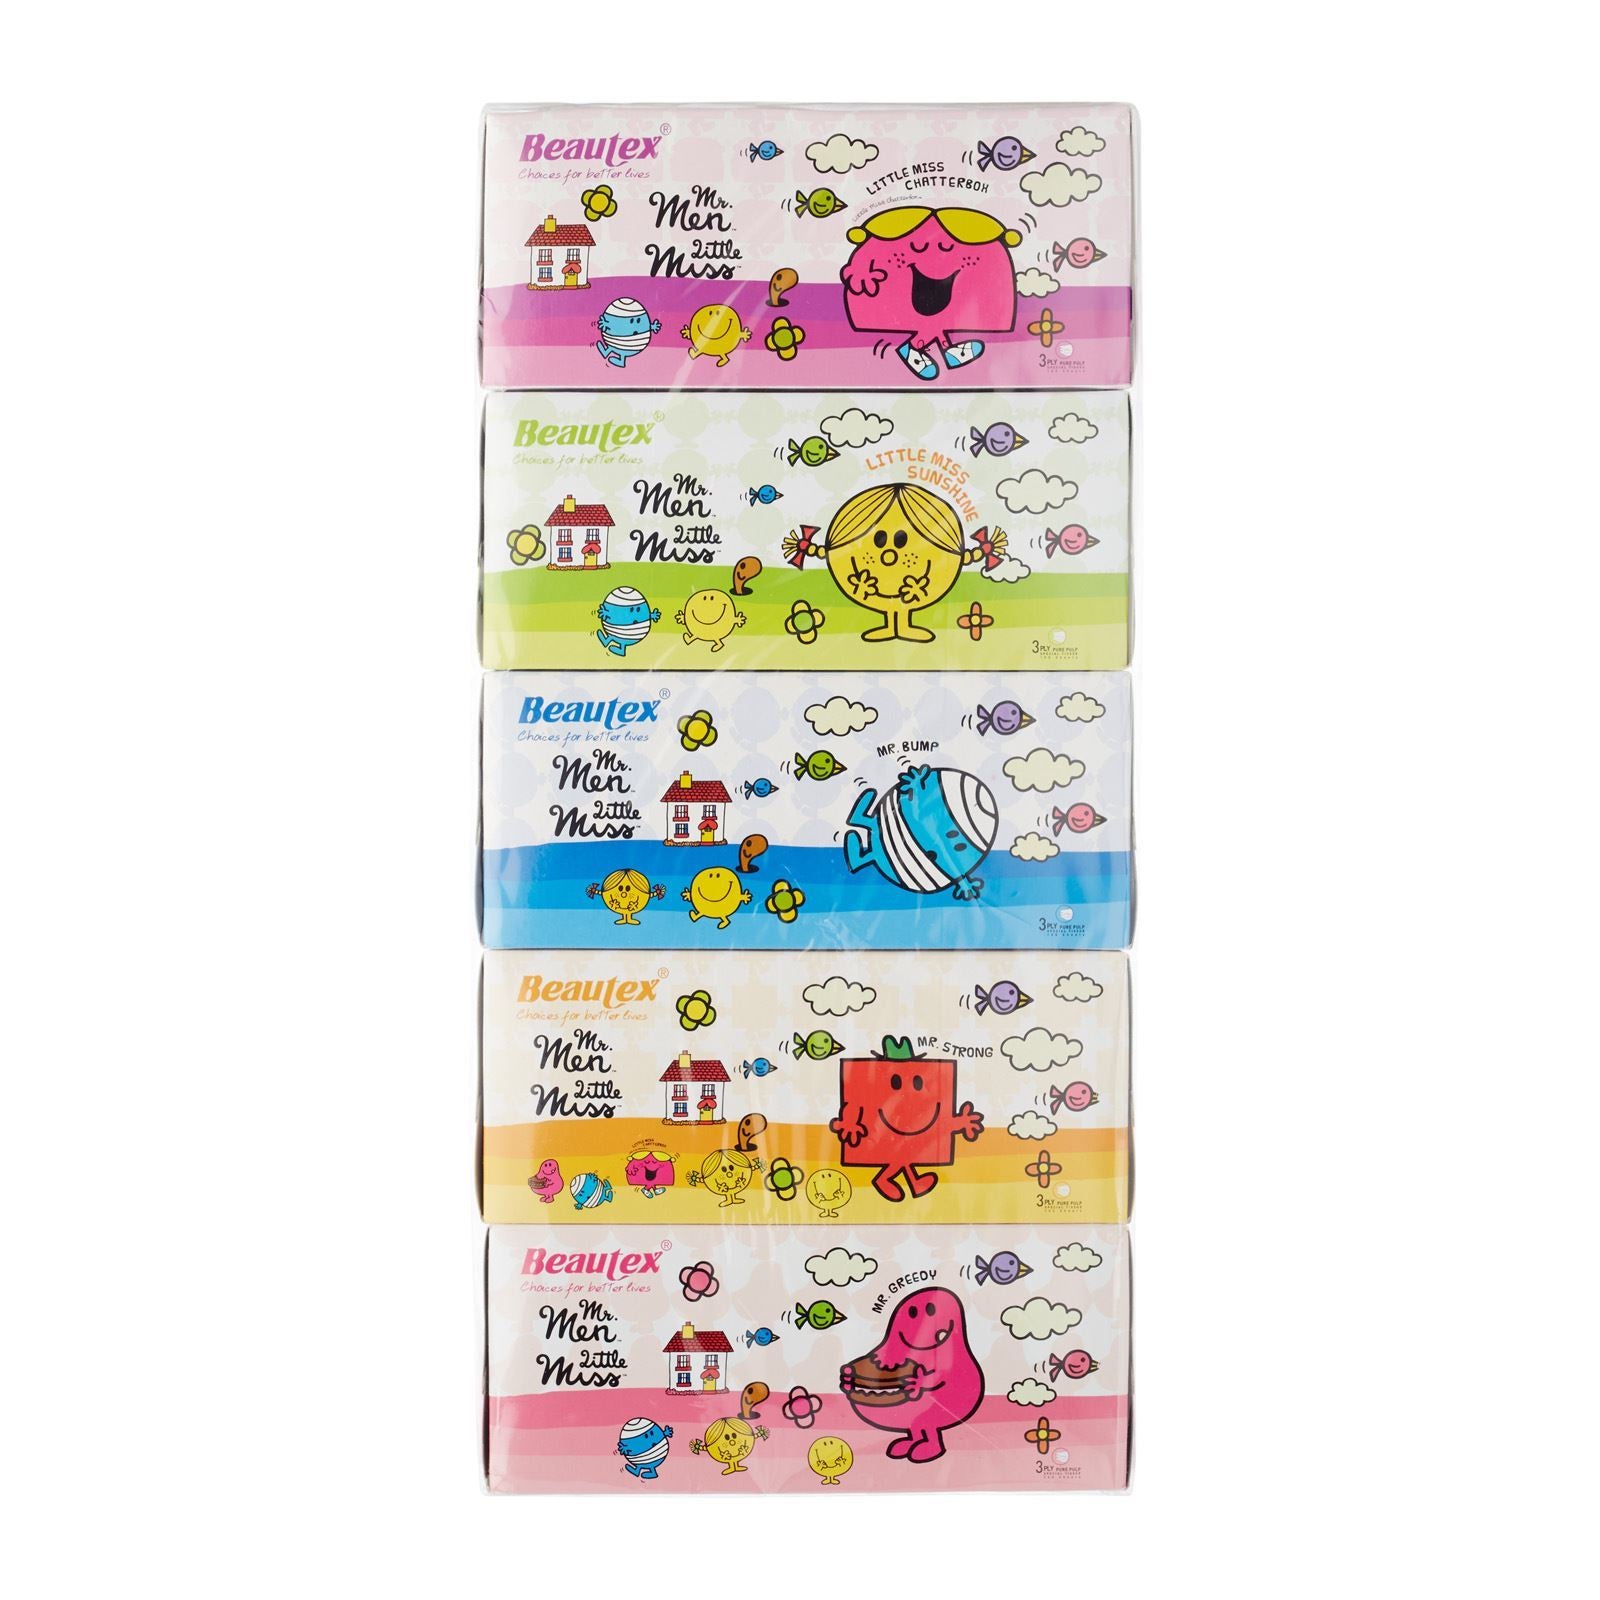 BEAUTEX Mr Men and Little Miss Pure Pulp 3 Ply Box Tissue